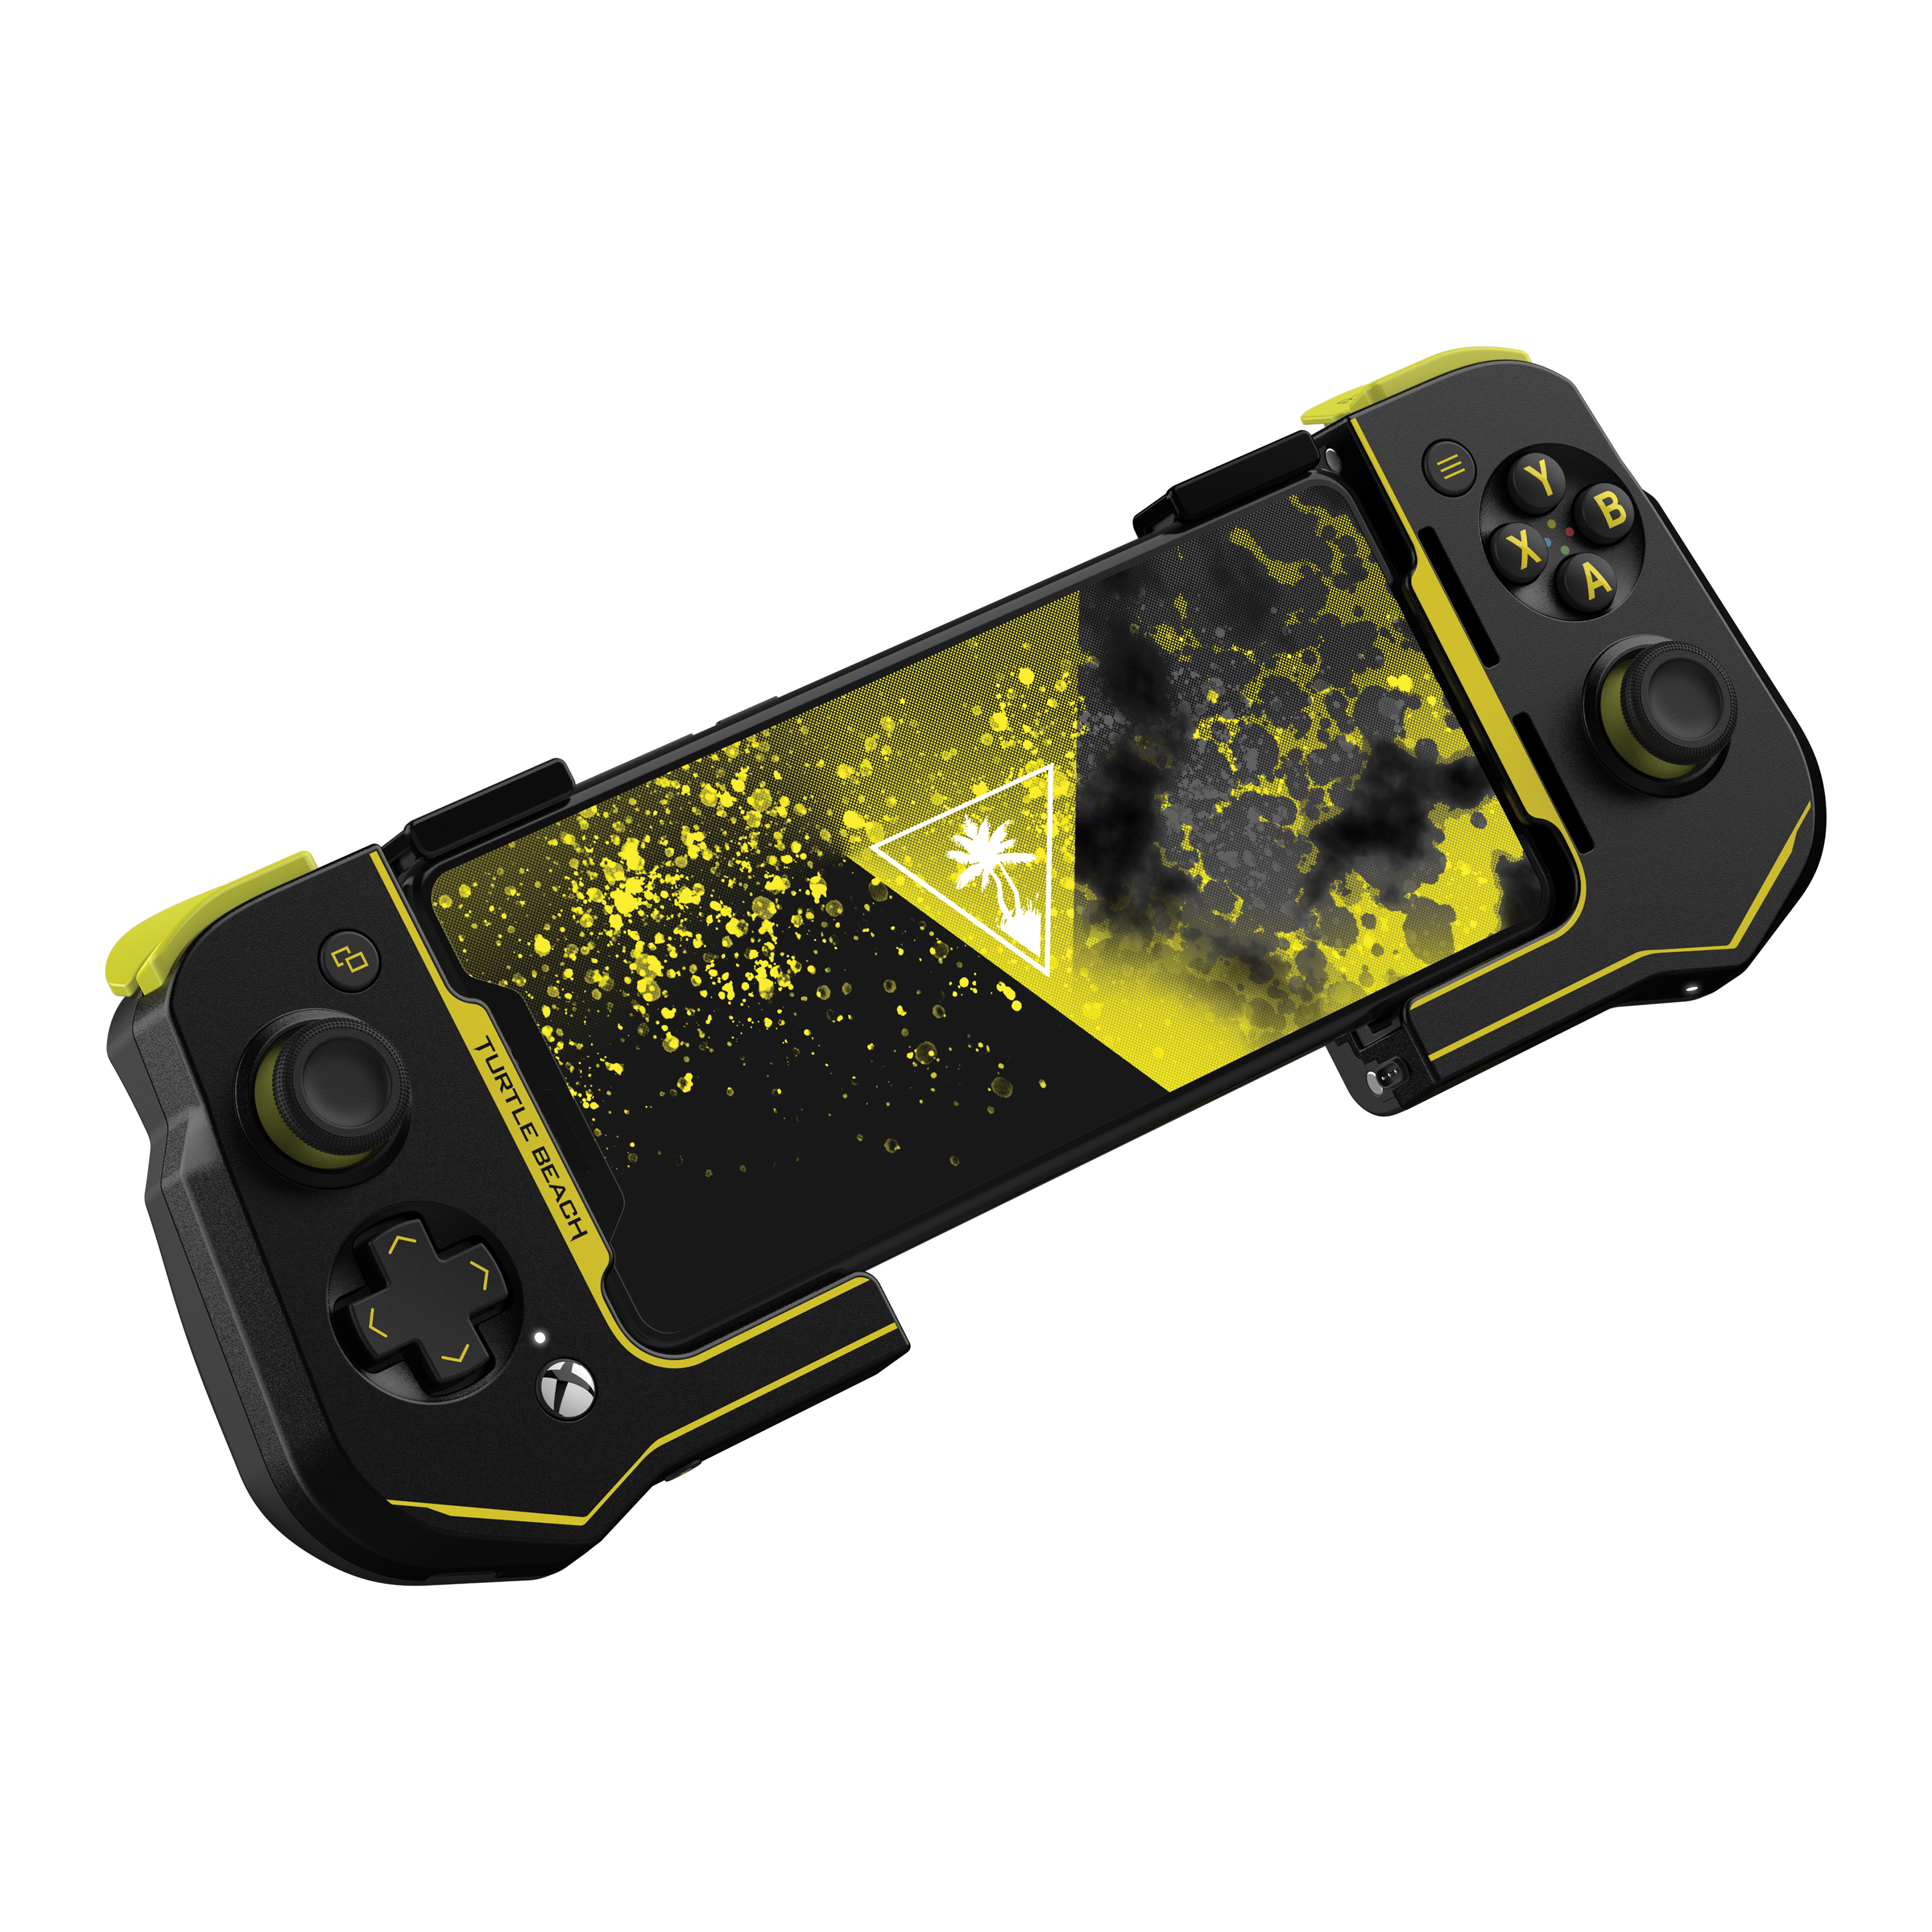 Atom Controller product image (Turtle Beach)